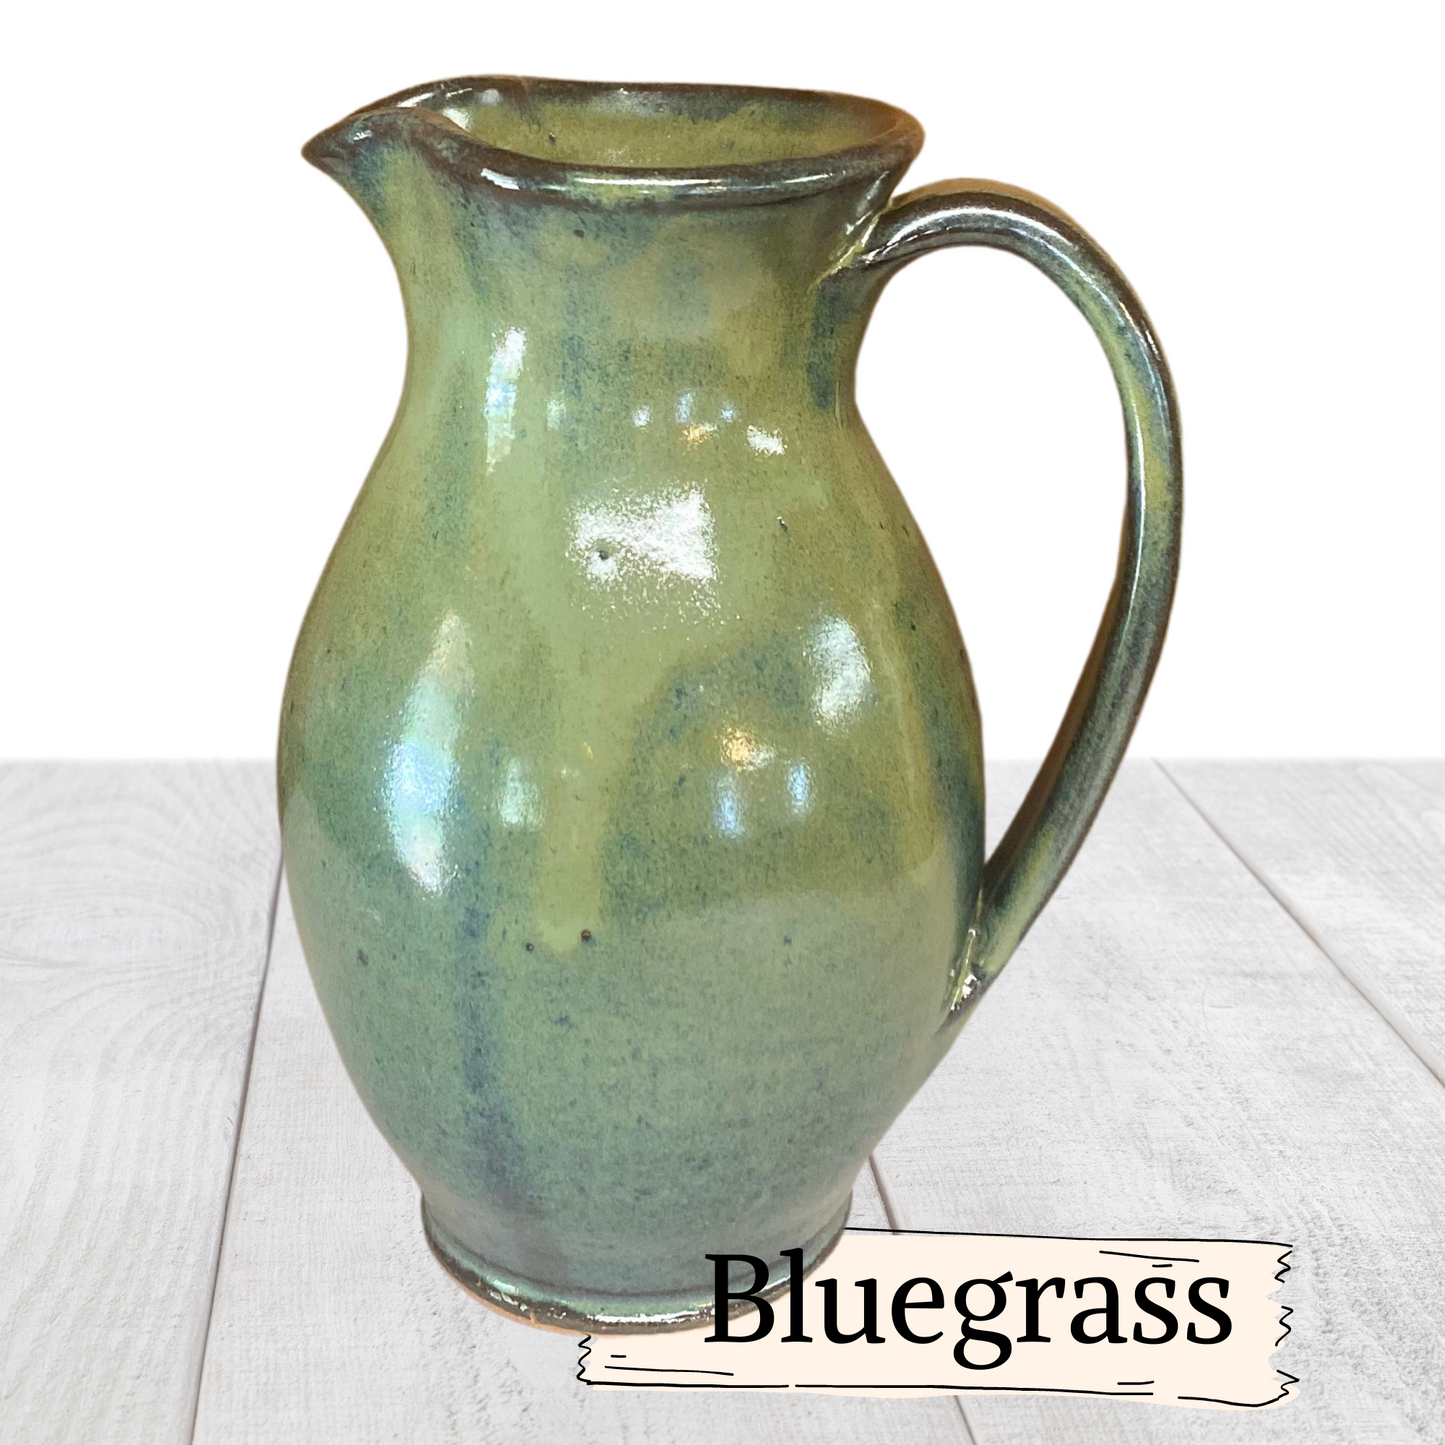 Water or Ice Tea Pitcher quart size  handmade pottery for coffee steep tea pour spout handle. Small to medium size